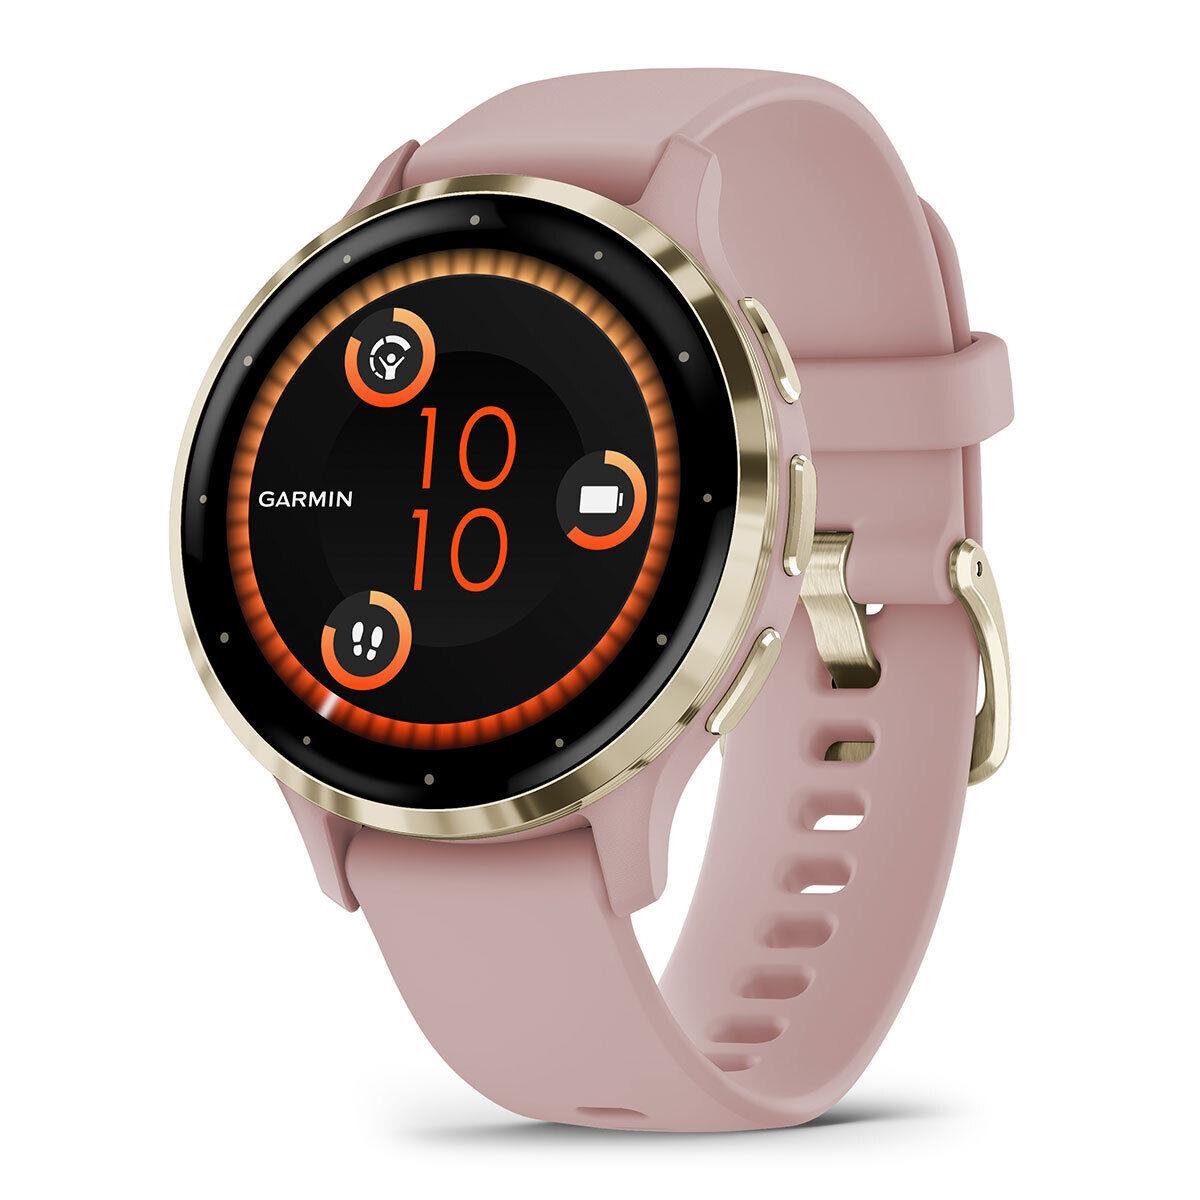 Garmin Venu 3/3S Gps Health Fitness Smartwatch with Amoled Touch Display Venu 3S (Soft Gold/Dust Rose)